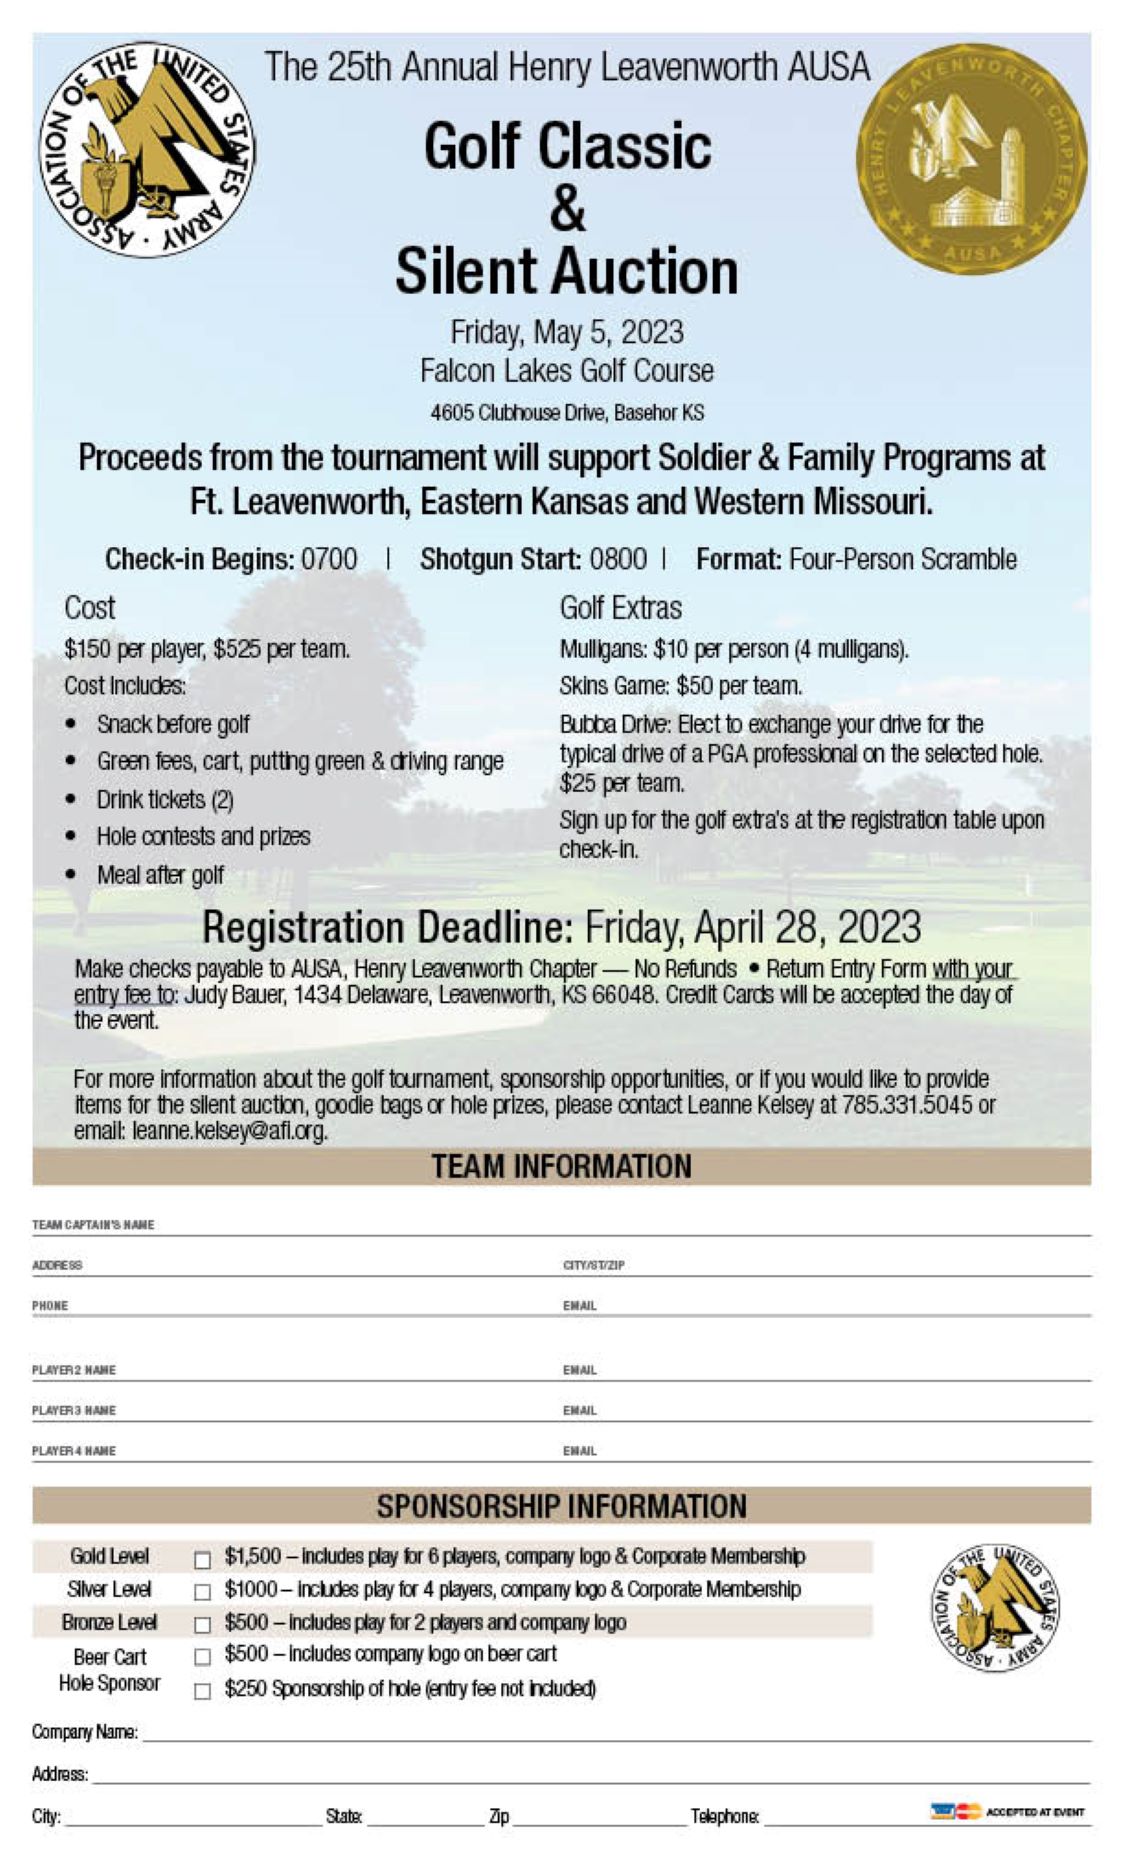 A flyer for The 25th Annual Henry Leavenworth AUSA Golf Classic & Silent Auction.